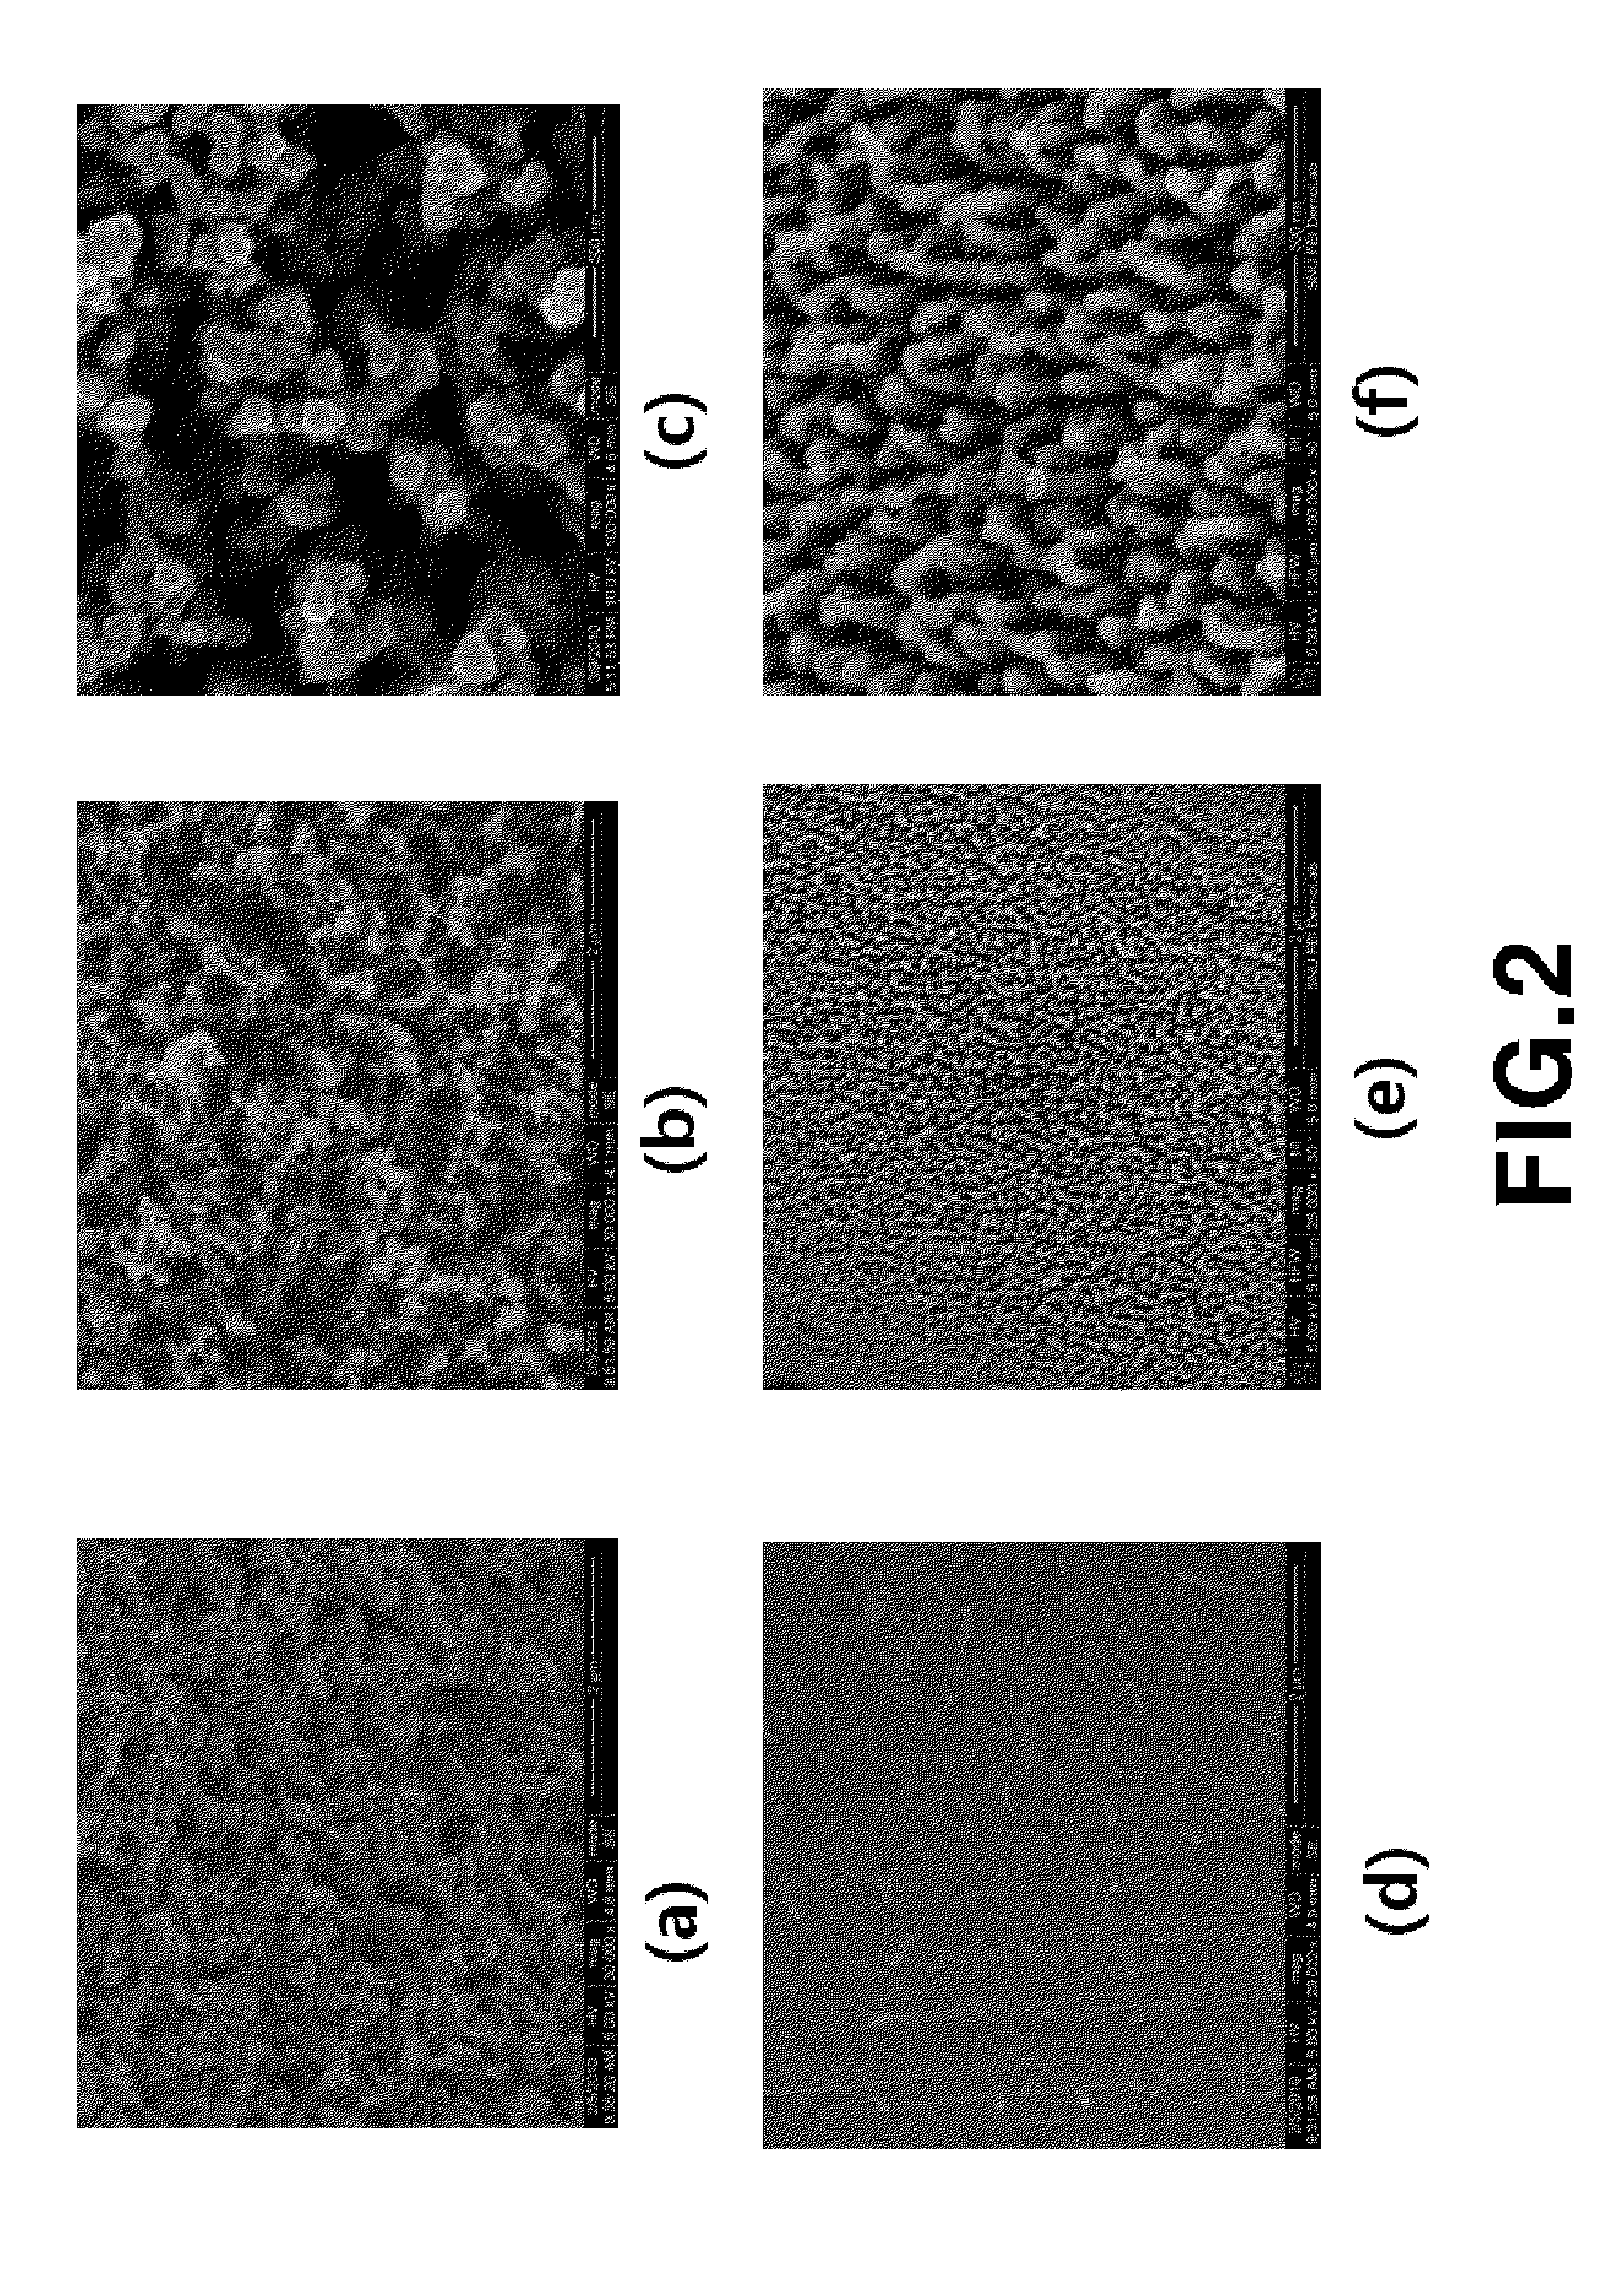 Fuel cell with enhanced mass transfer characteristics